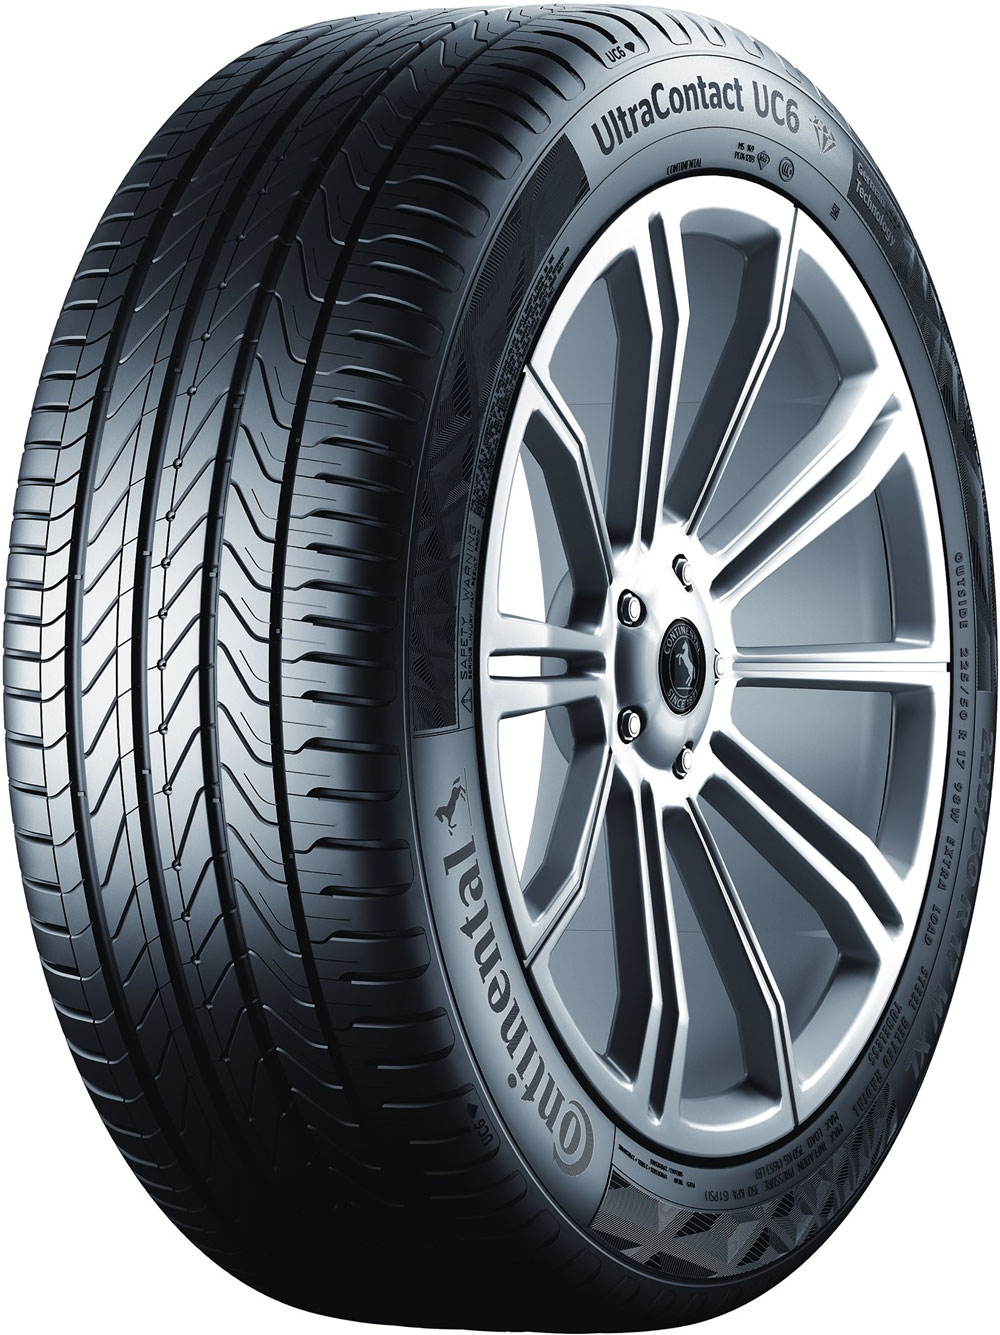 Anvelope auto CONTINENTAL UCXLFR XL 195/55 R20 95H